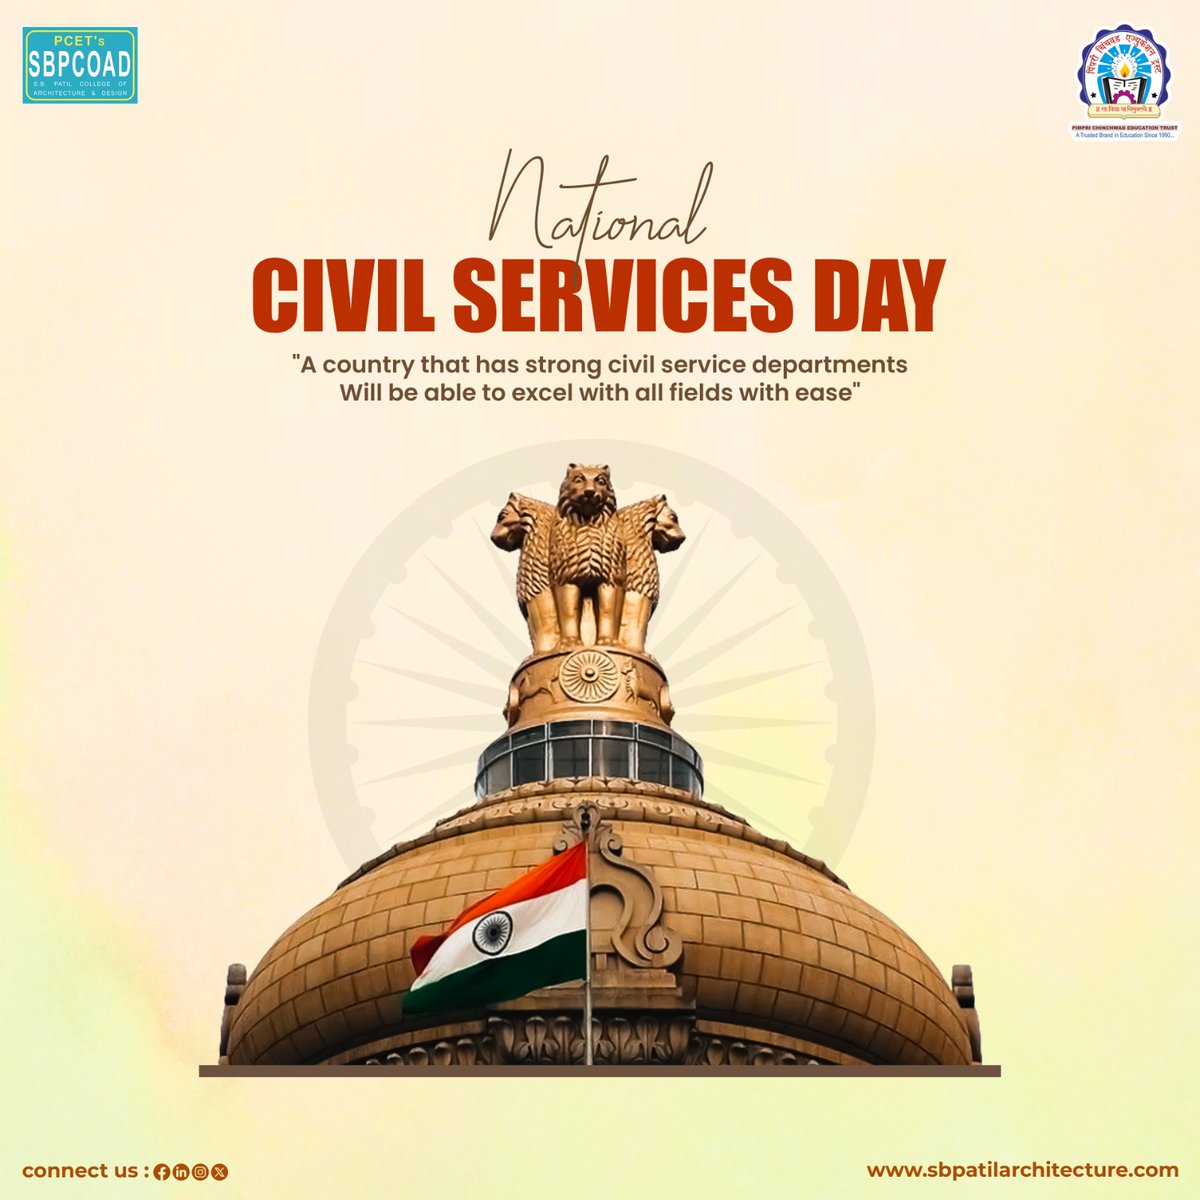 Today, we honor the dedication & commitment of civil servants who work tirelessly to serve our nation. Their unwavering efforts shape our society & make a positive impact on countless lives. Thank you for your service & dedication. #NationalCivilServiceDay #CivilServiceDay